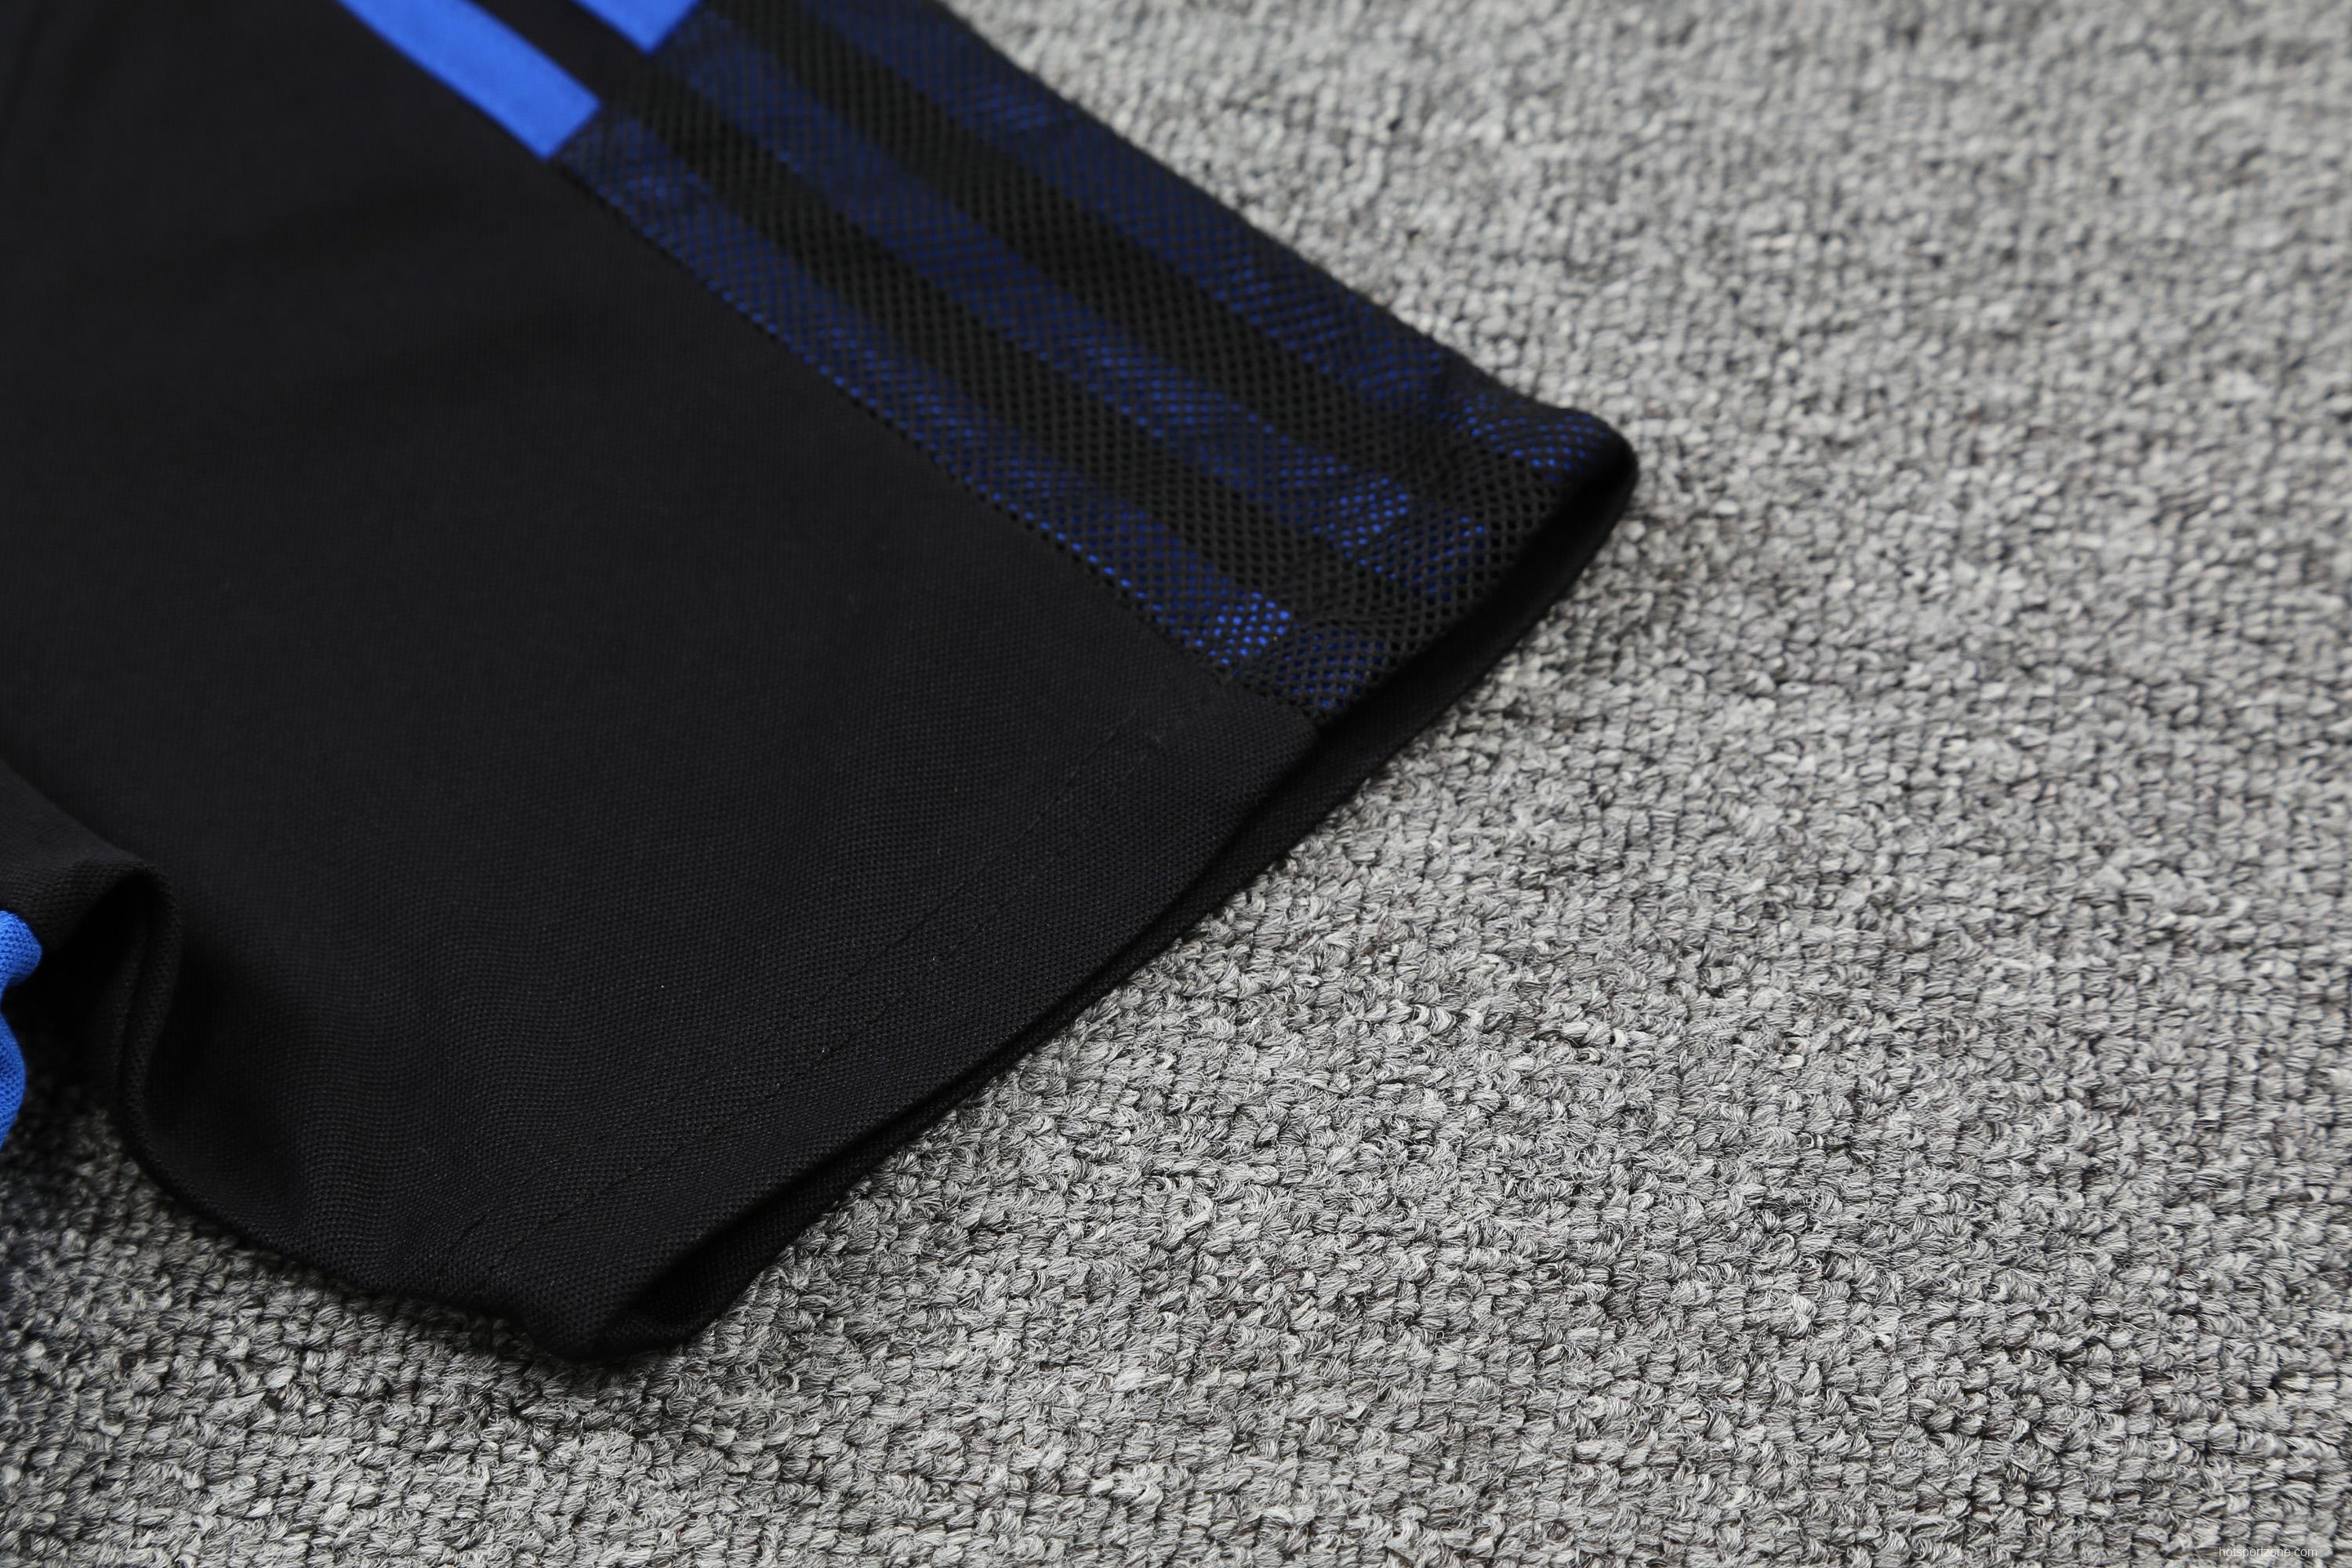 Real Madrid POLO kit black and blue stripes (not supported to be sold separately)